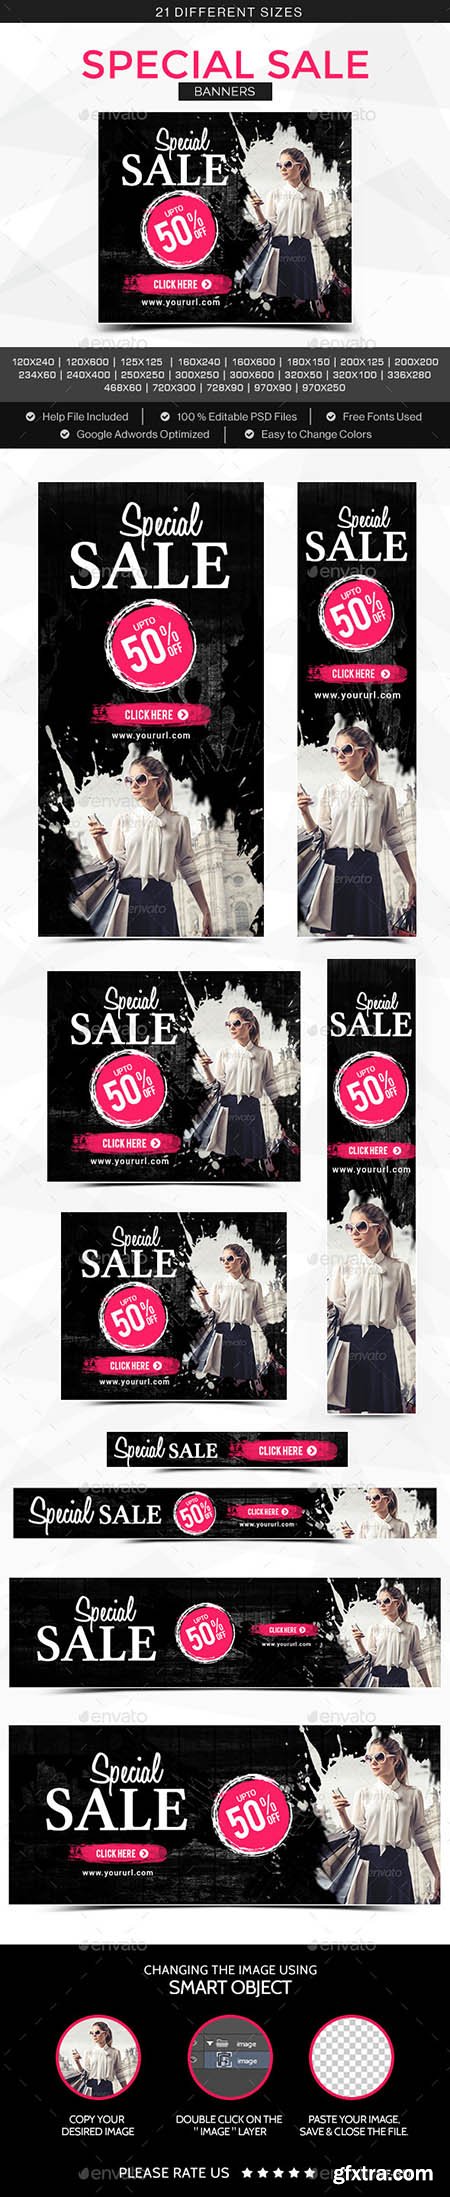 GraphicRiver - Special Sale Banners 11342218